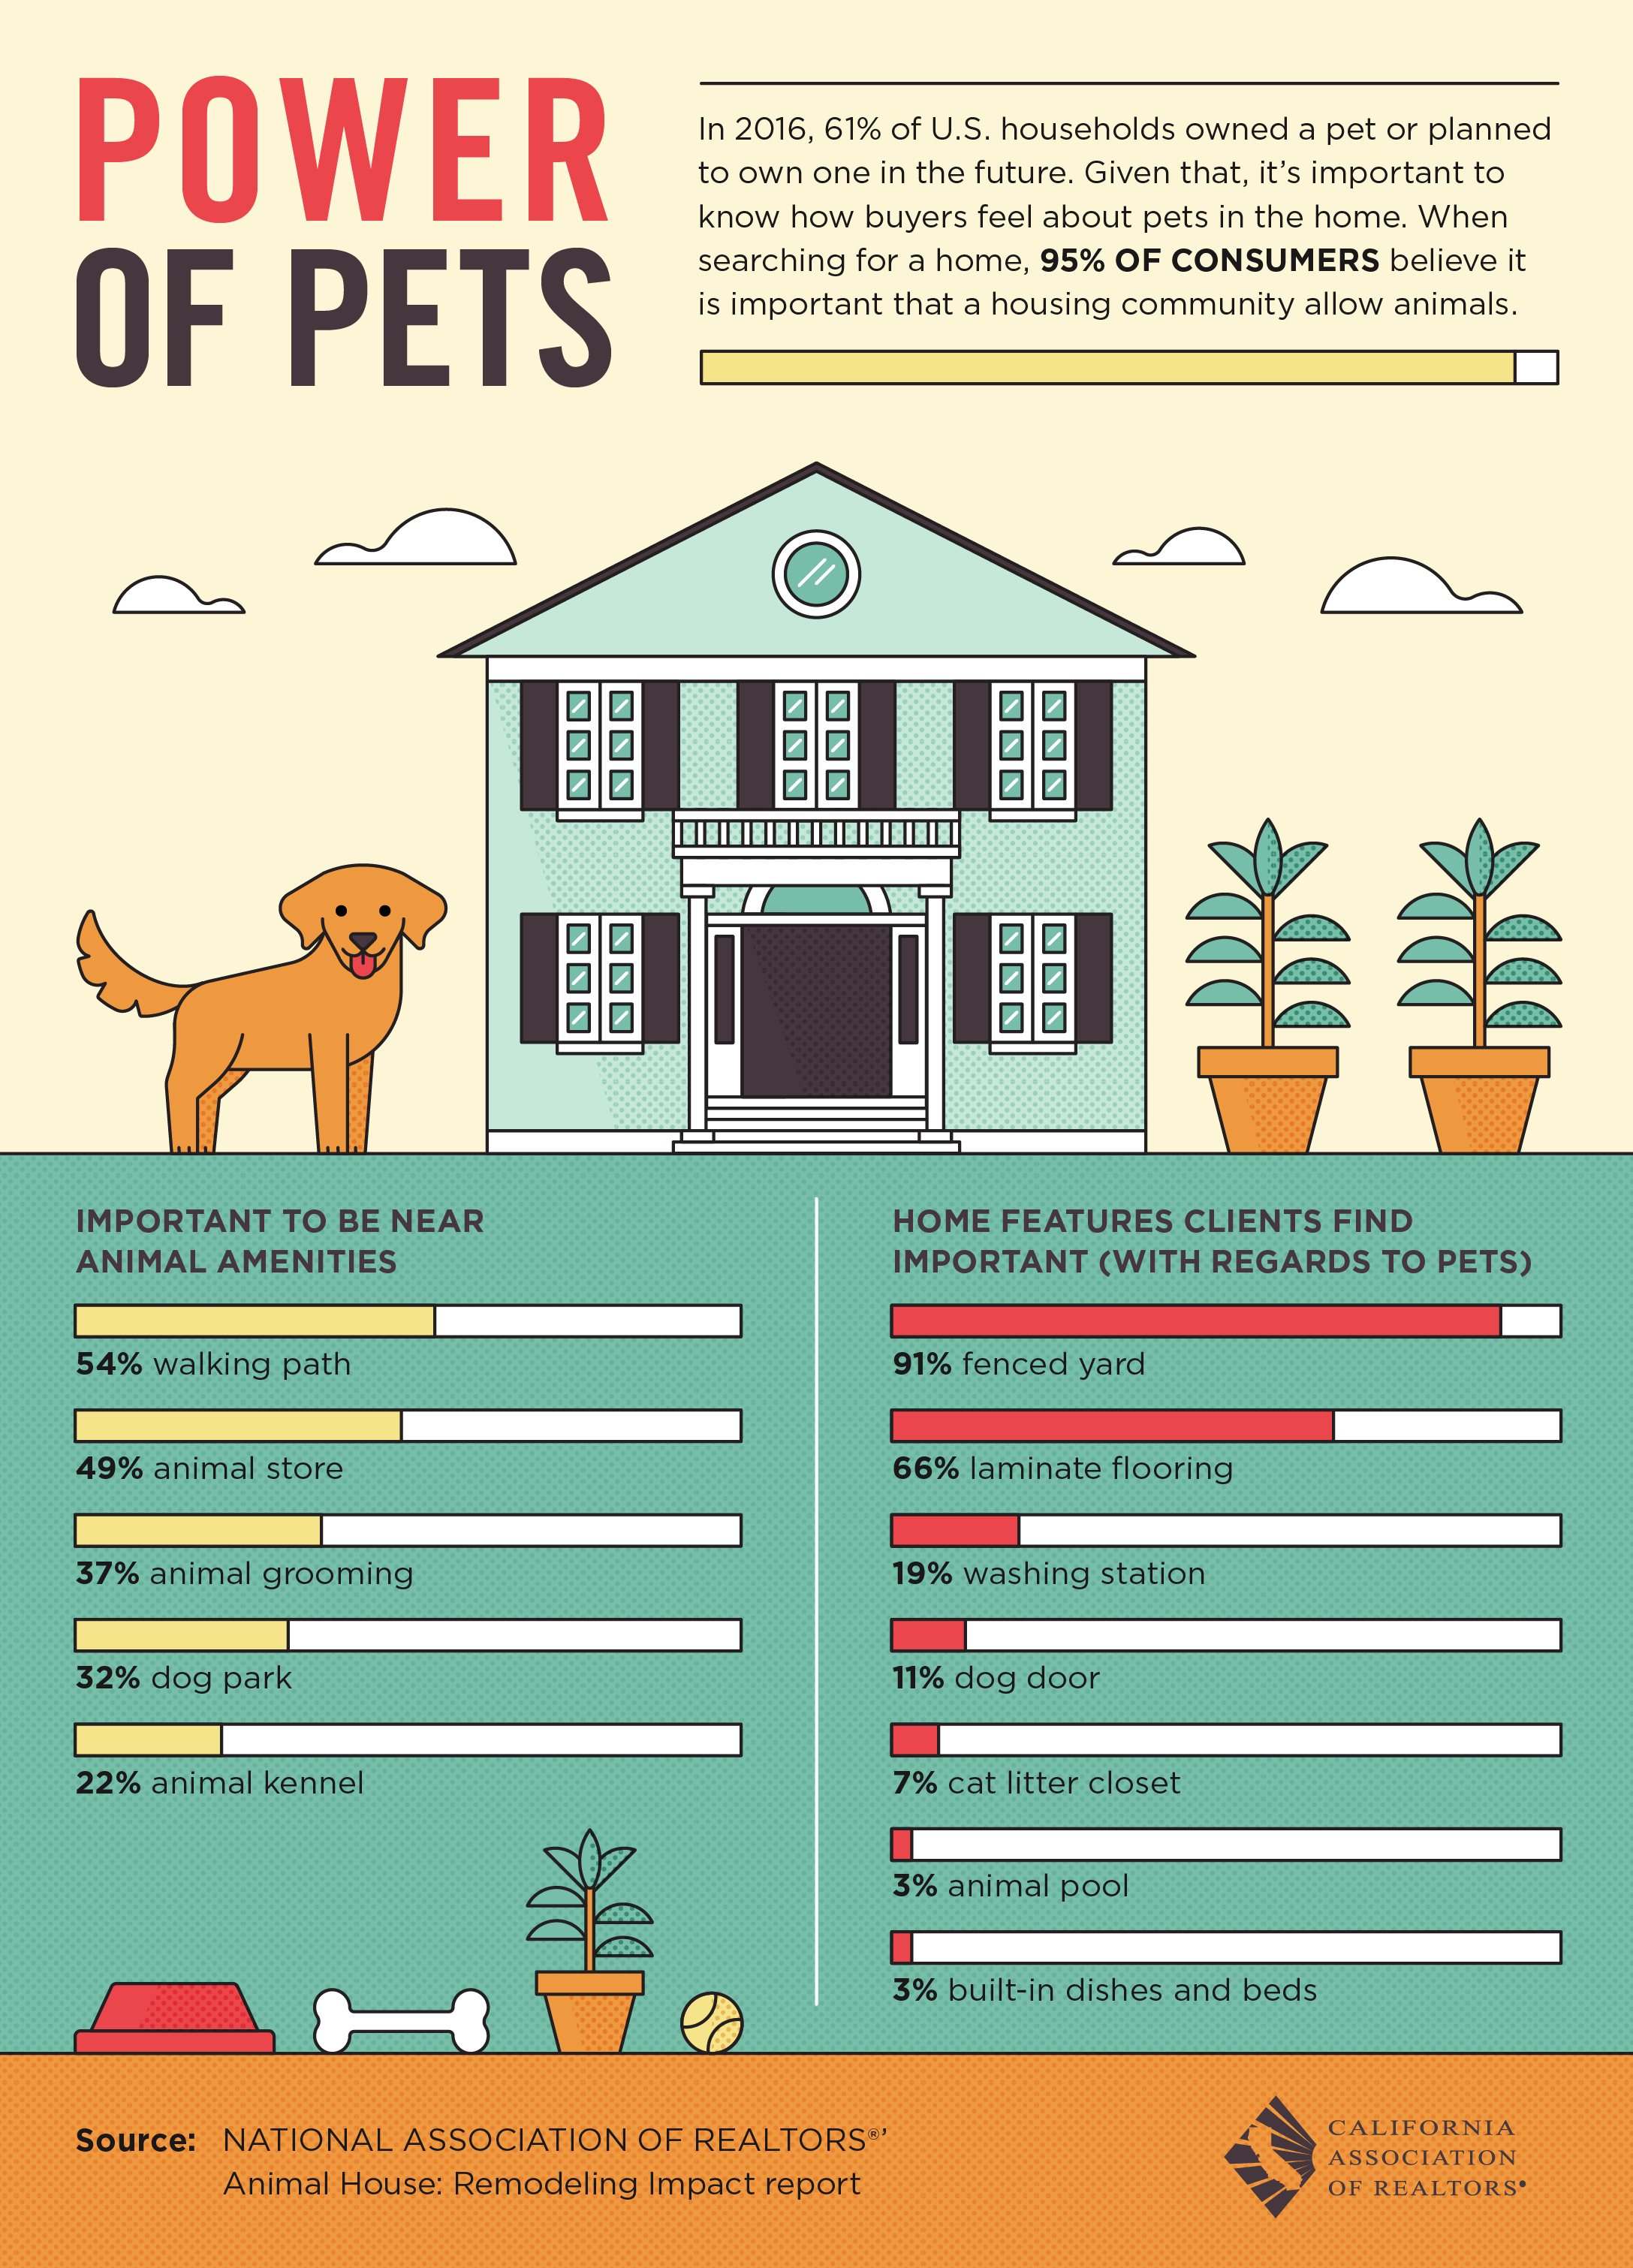 In 2016, 61% of U.S. households owned a pet or planned to own one in the future. Given that, it's important to know how buyers feel about pets in the home. When searching for a home, 95% of Consumers believe it is important that a housing community allow animals.